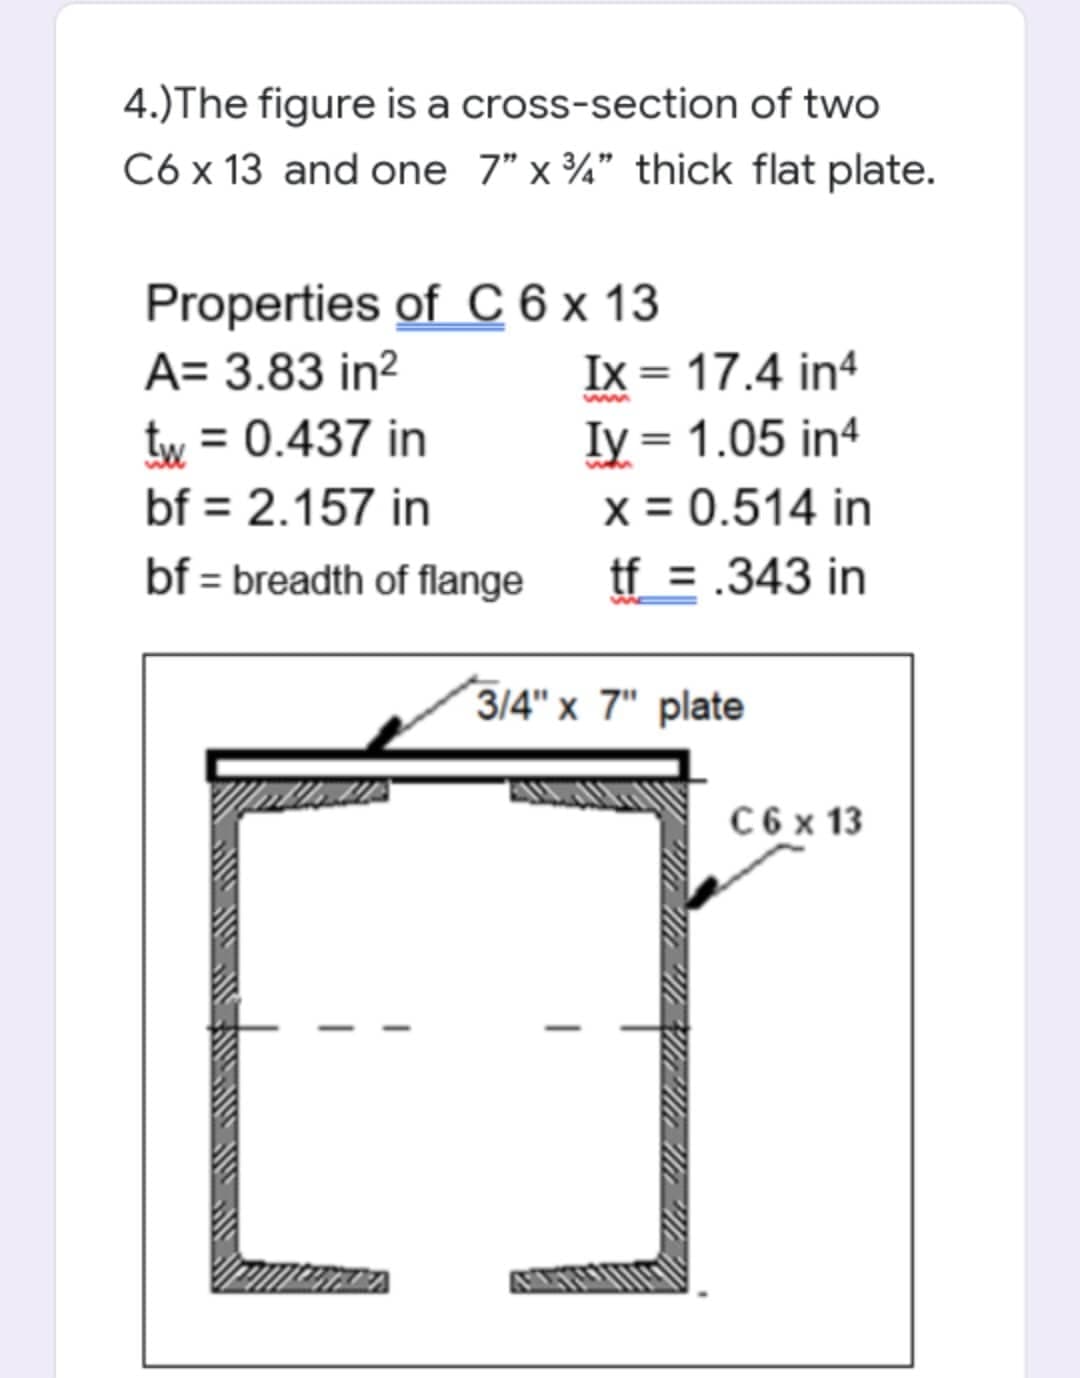 4.)The figure is a cross-section of two
C6 x 13 and one 7" x ¾" thick flat plate.
Properties of C 6 x 13
Ix = 17.4 in4
Iy = 1.05 in4
x = 0.514 in
tf = .343 in
A= 3.83 in?
tw = 0.437 in
bf = 2.157 in
bf = breadth of flange
3/4" x 7" plate
C 6 x 13
